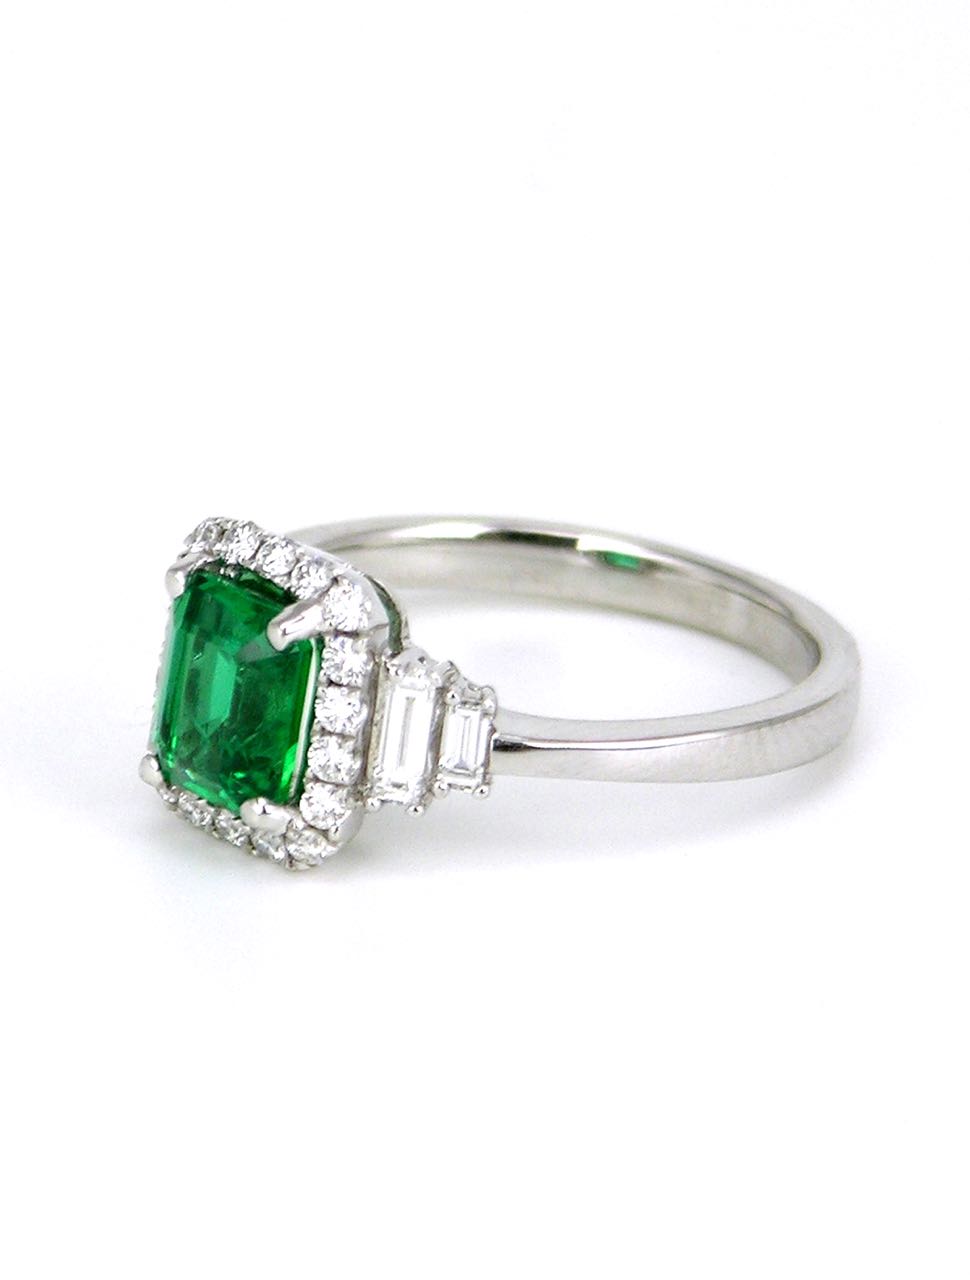 18k white gold emerald and diamond ring